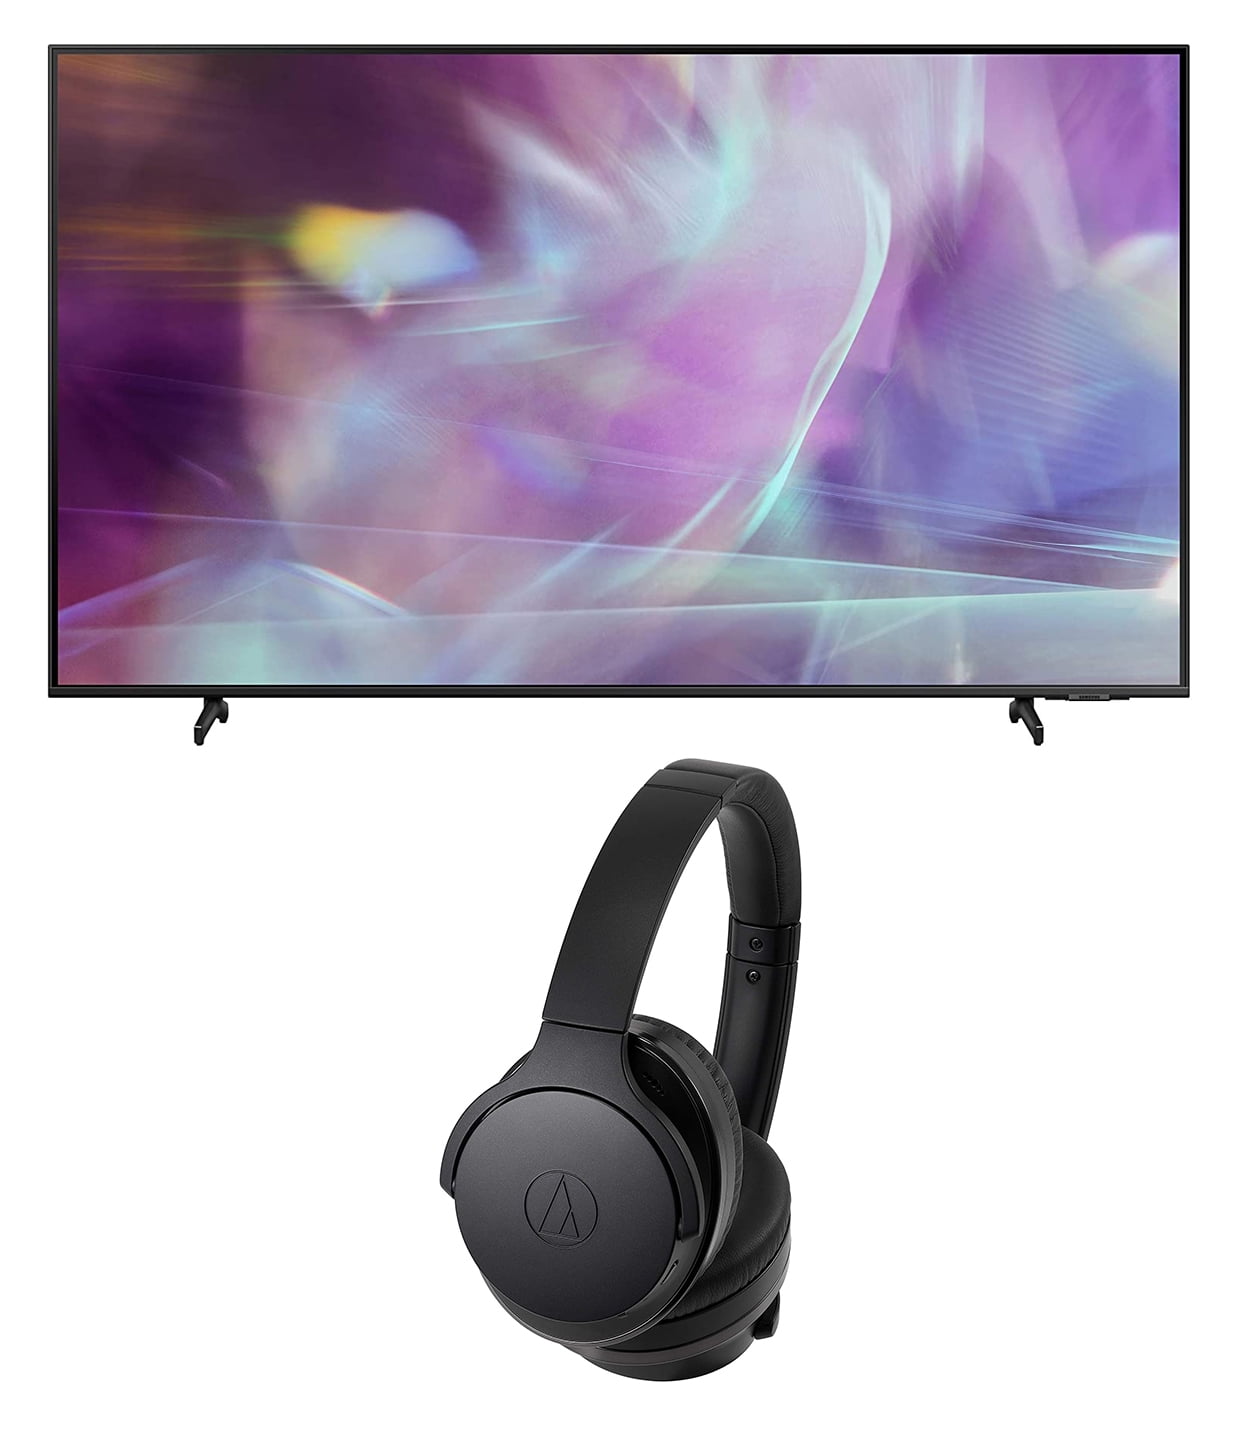 SAMSUNG QN32Q60AA 32" QLED Quantum HDR 4K Smart TV with Audio Technica ATH-ANC900BT Over-Ear Noise-Cancelling Wireless Headphones (2021)